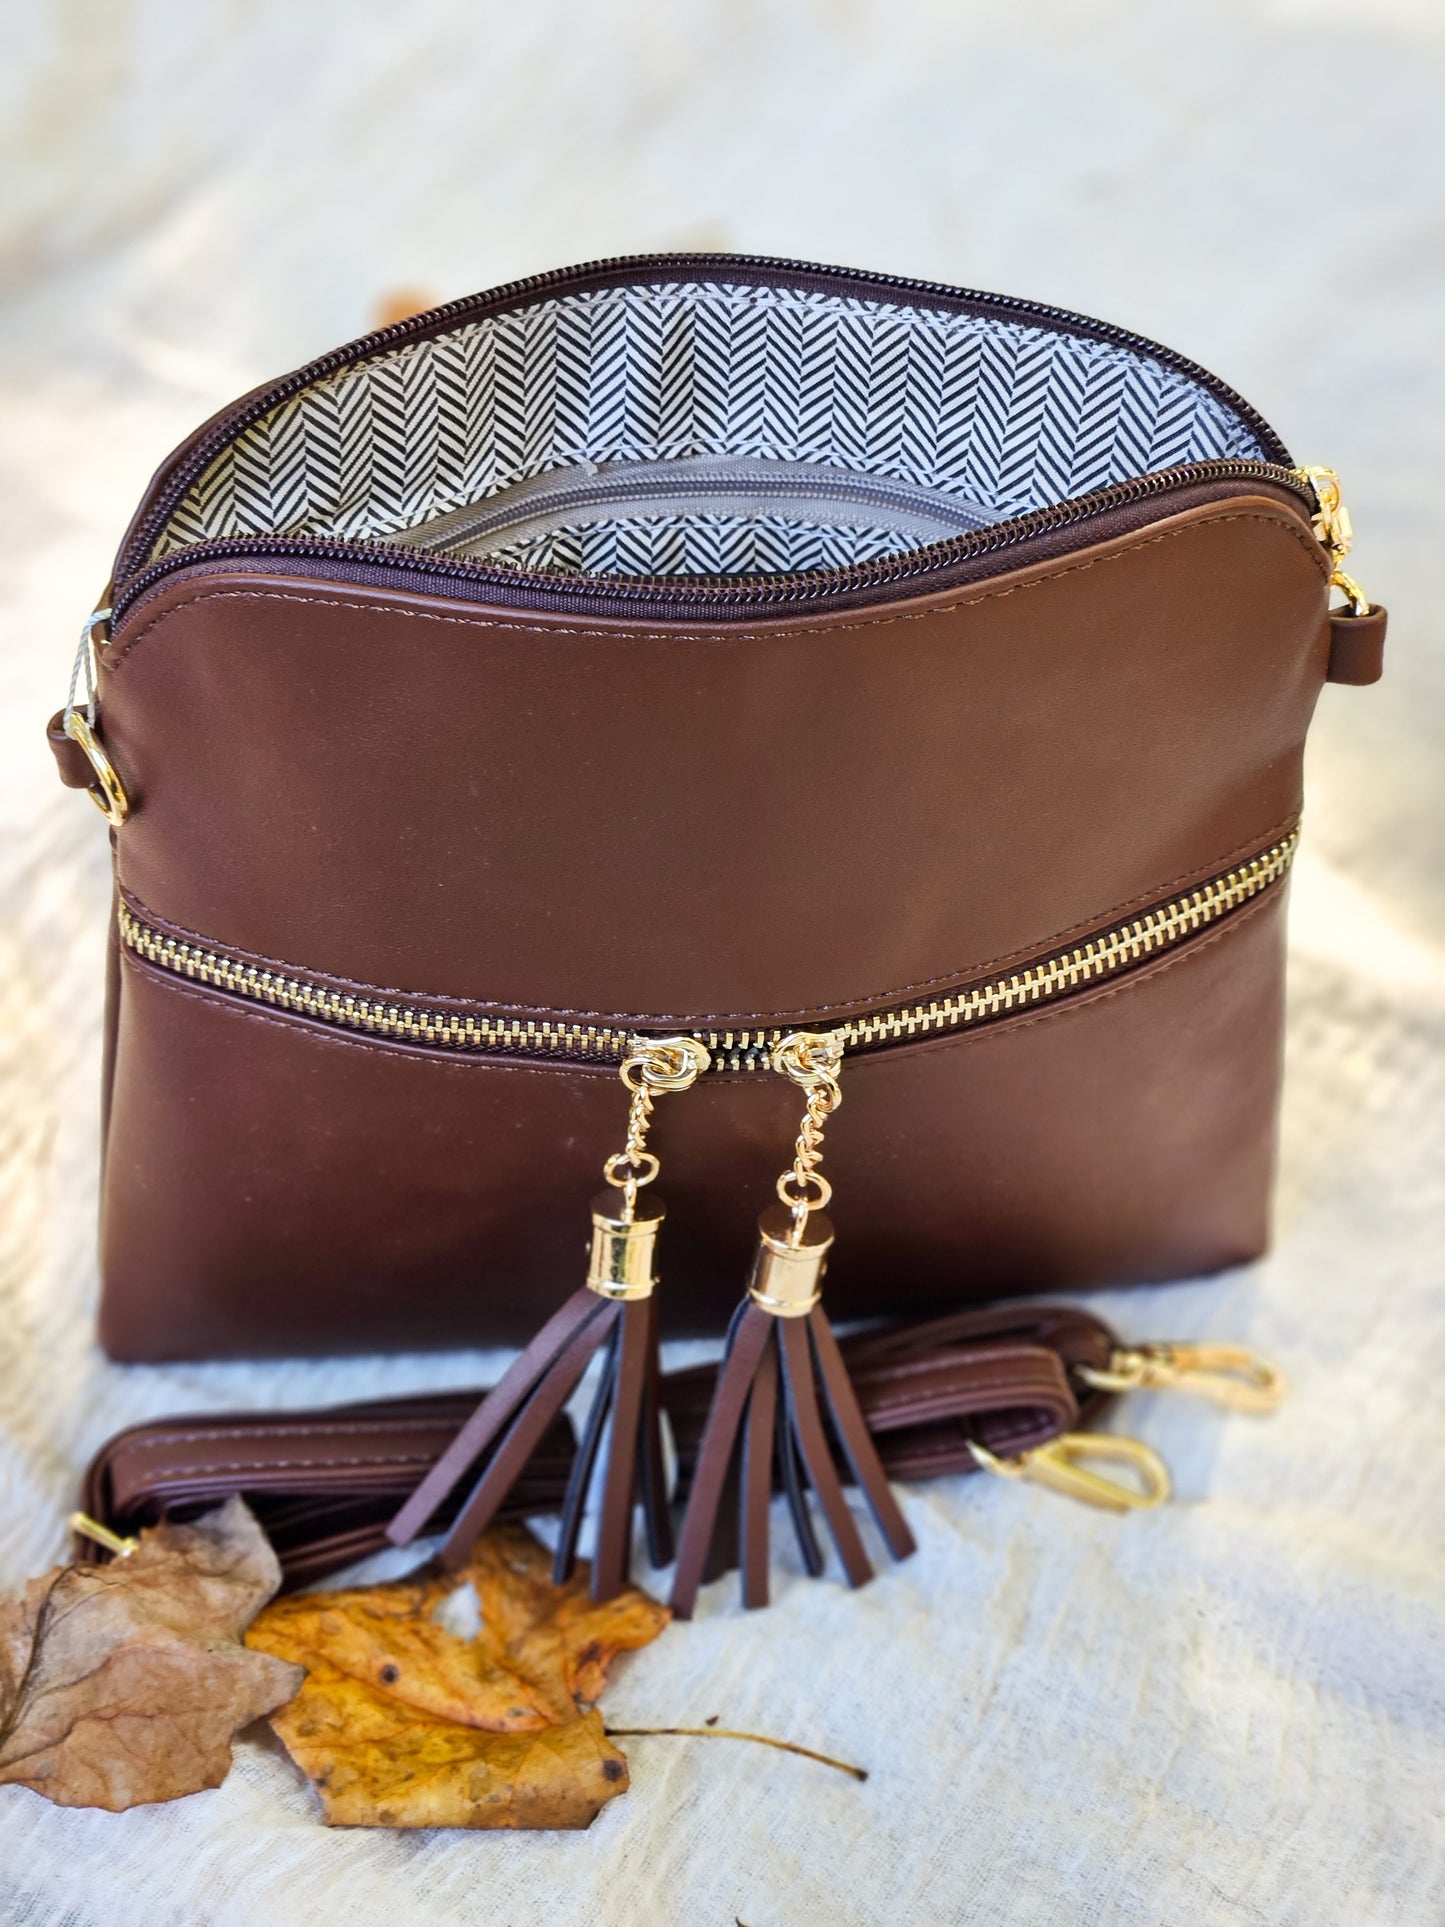 Two Tone Crossbody/Wristlet with Front Zip Pocket in Dark Chocolate